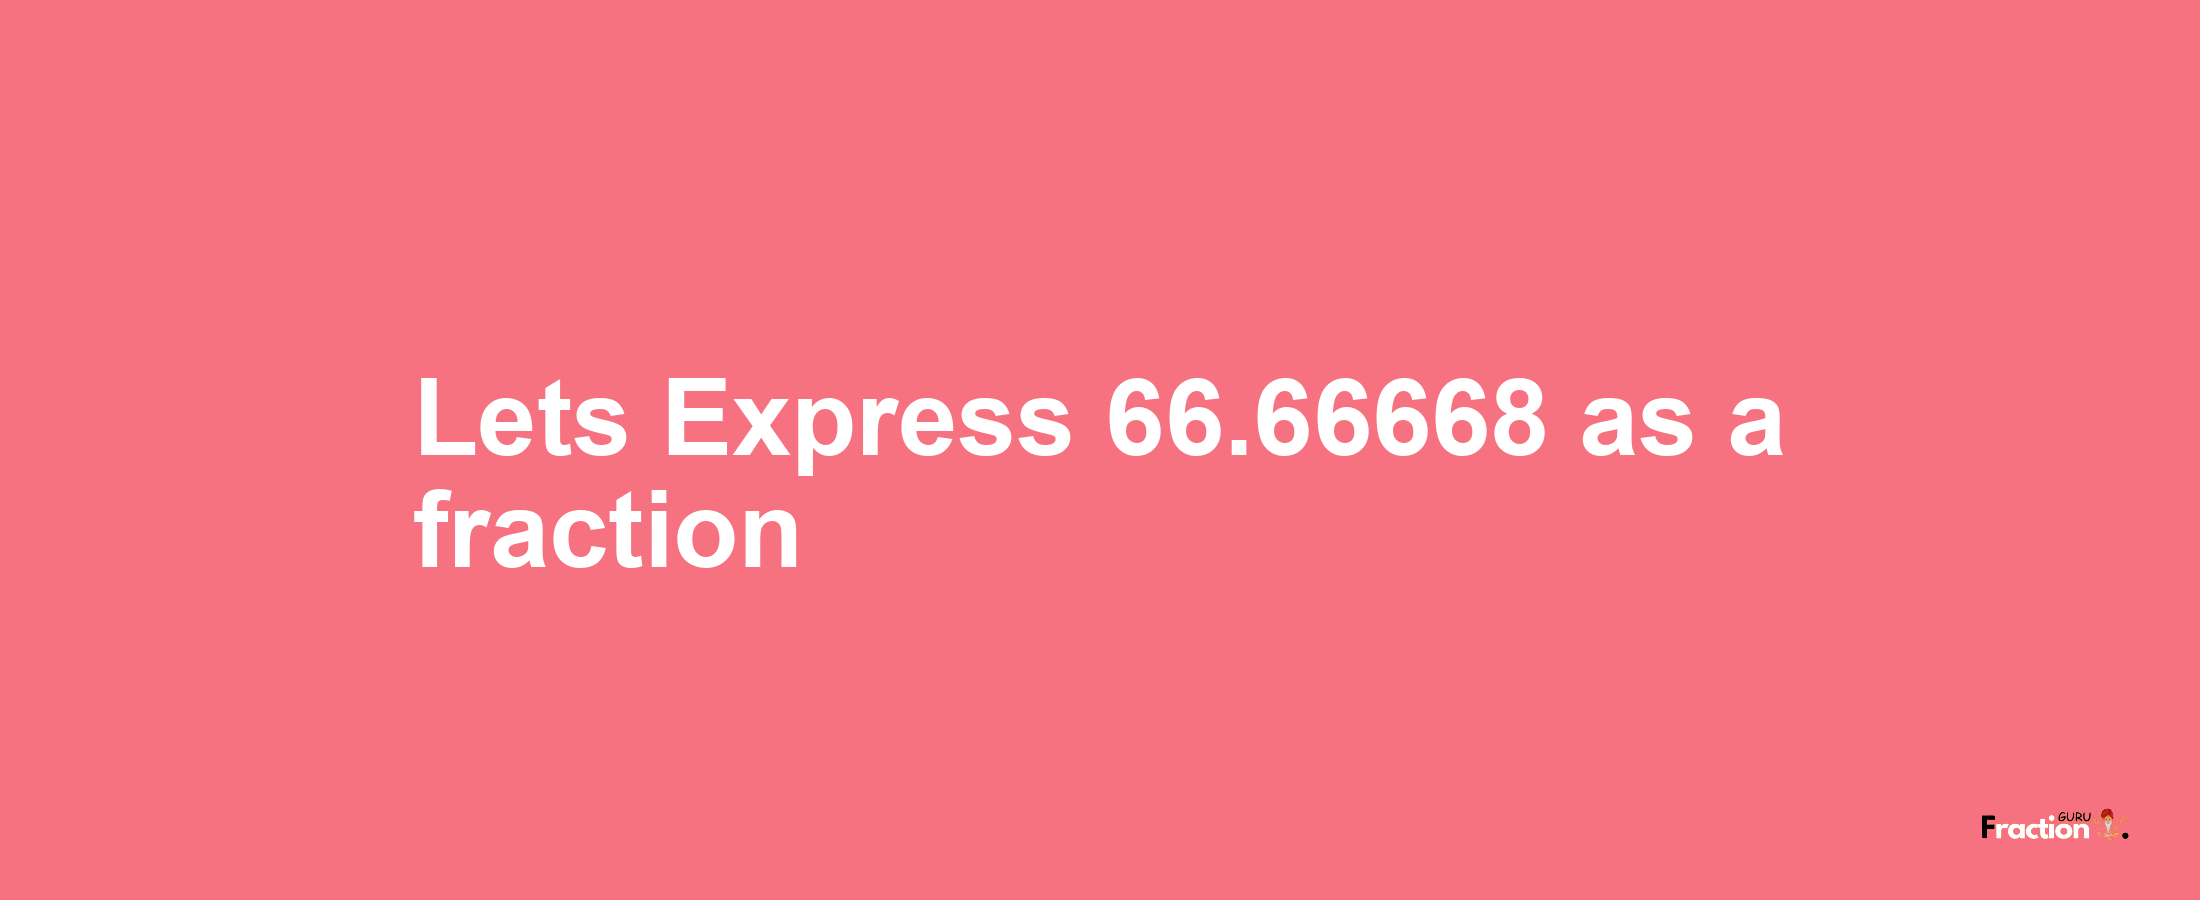 Lets Express 66.66668 as afraction